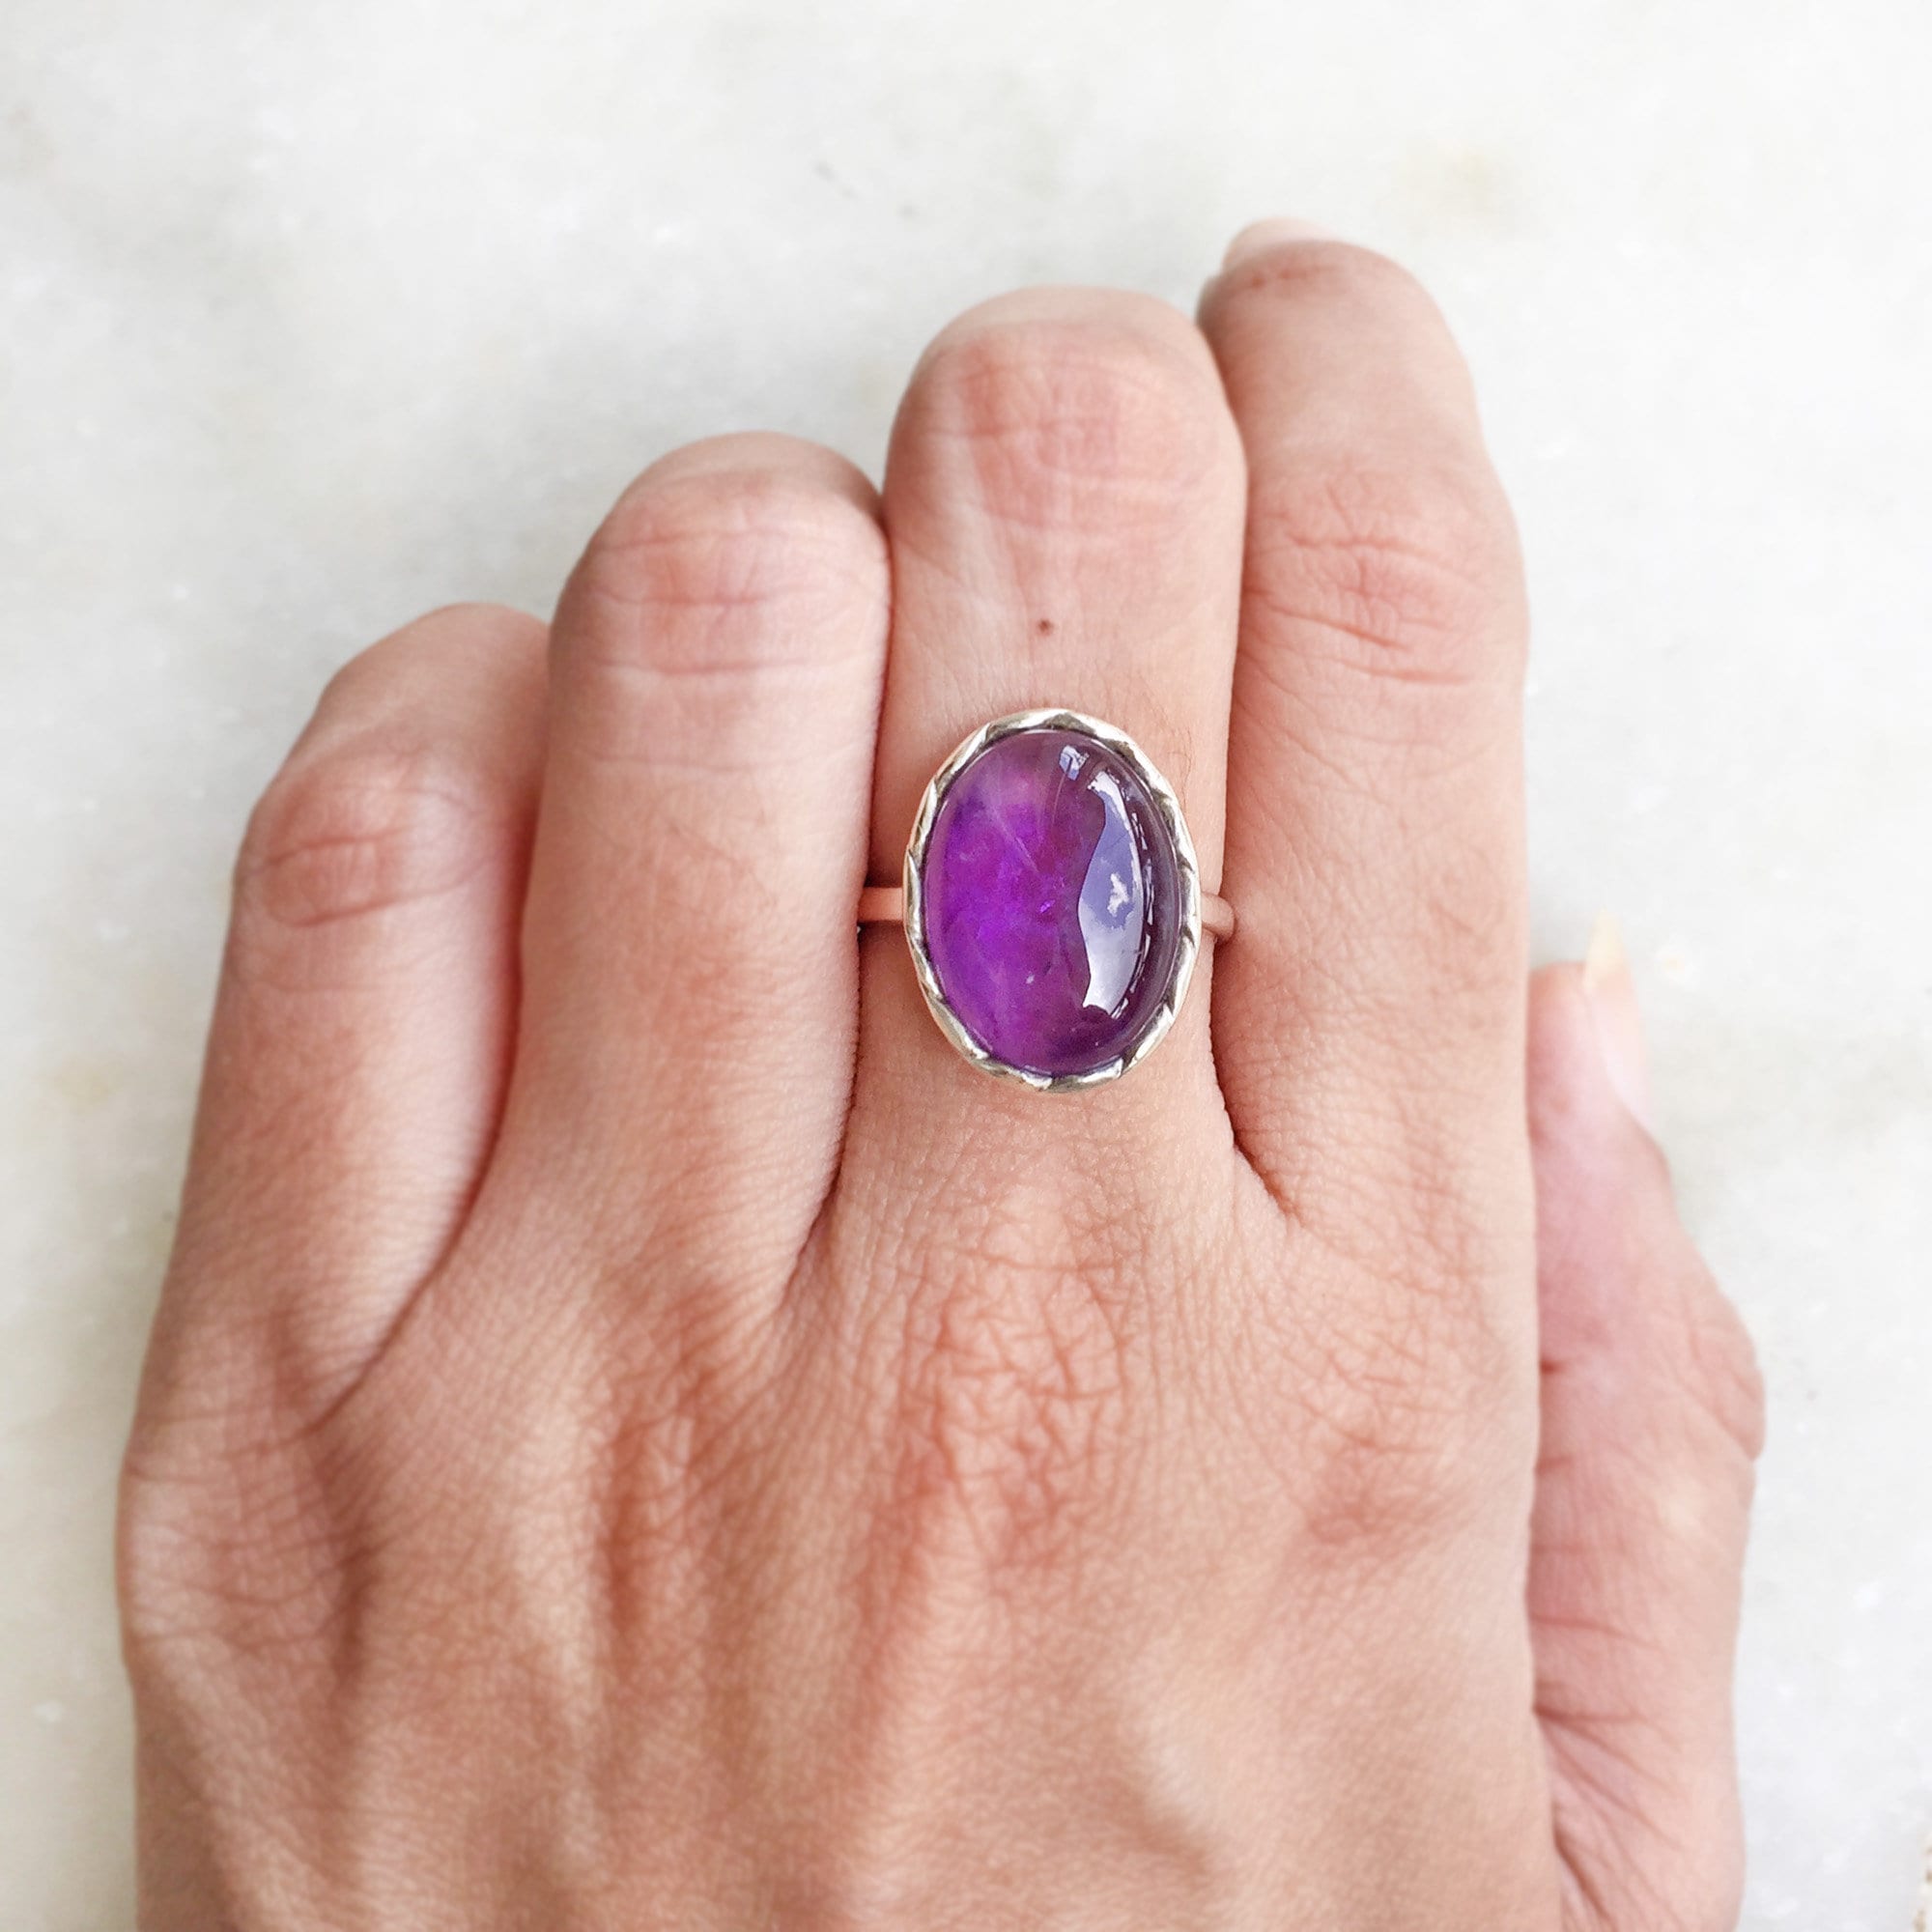 Details about   Silver Amethyst Ring 2.5 Ct Amethyst Band Handmade Amethyst Ring 925 Silver Ring